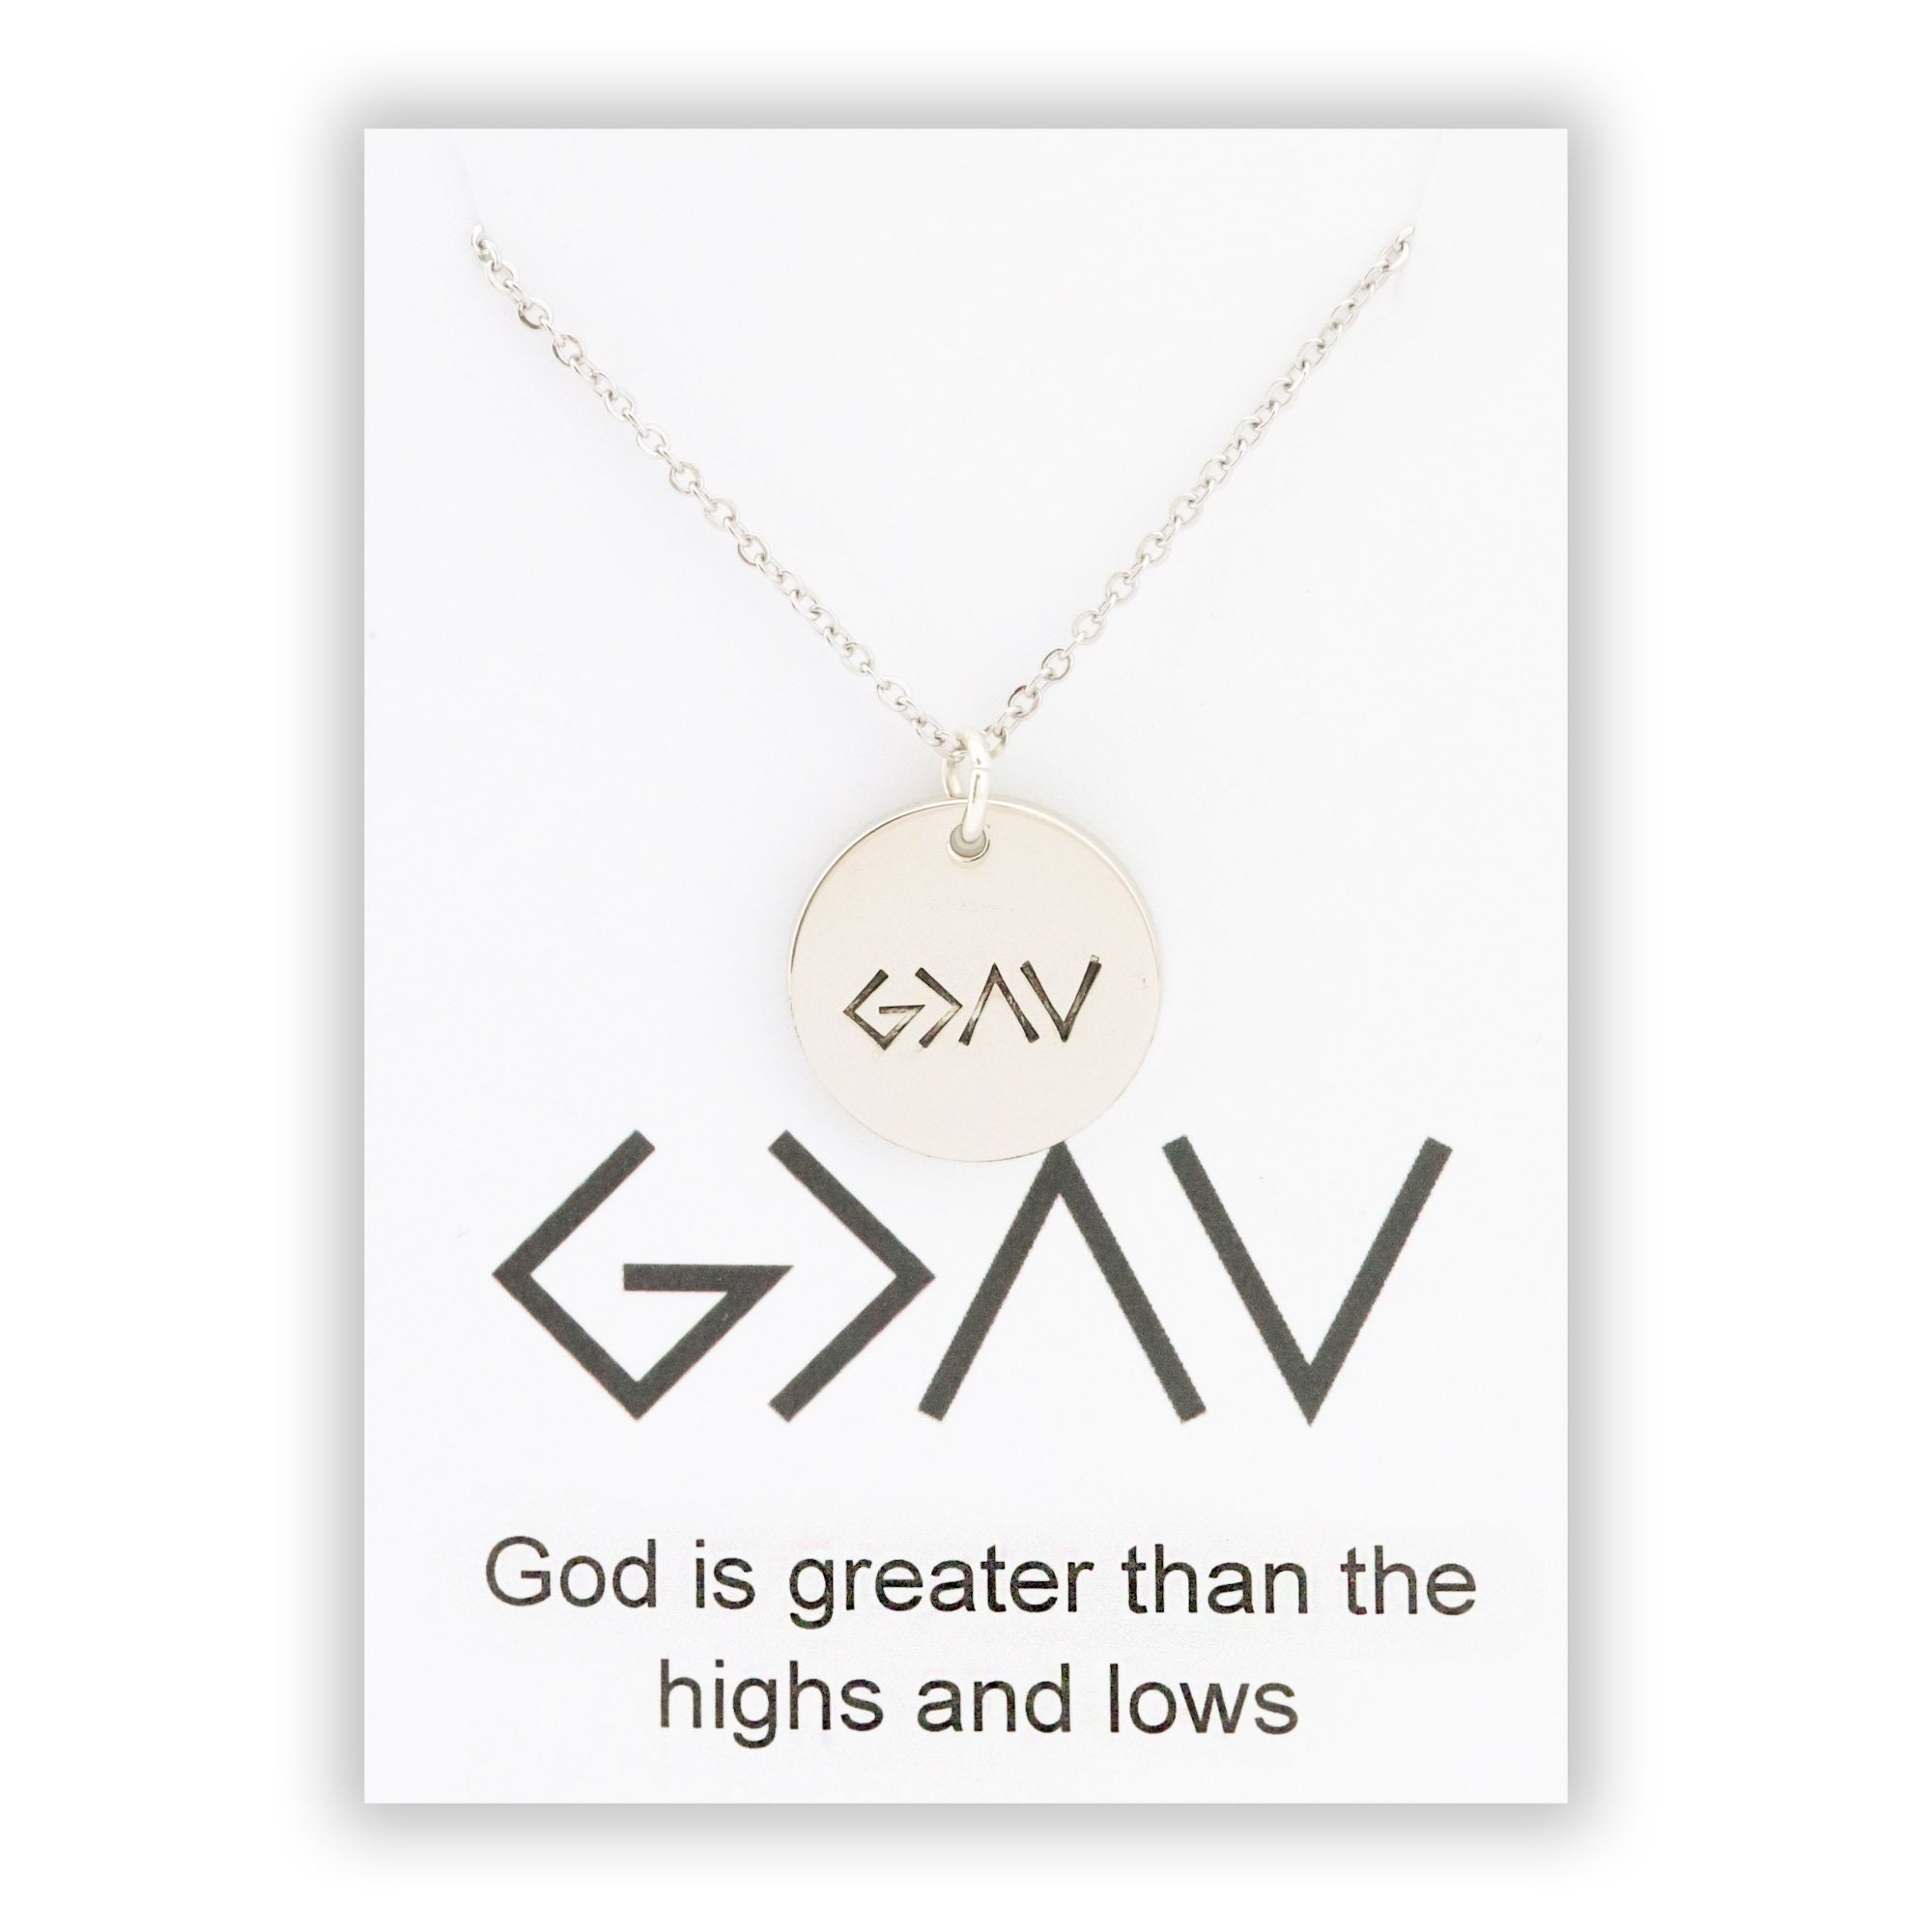 God is greater than the highs and lows necklace – Reflection of Memories